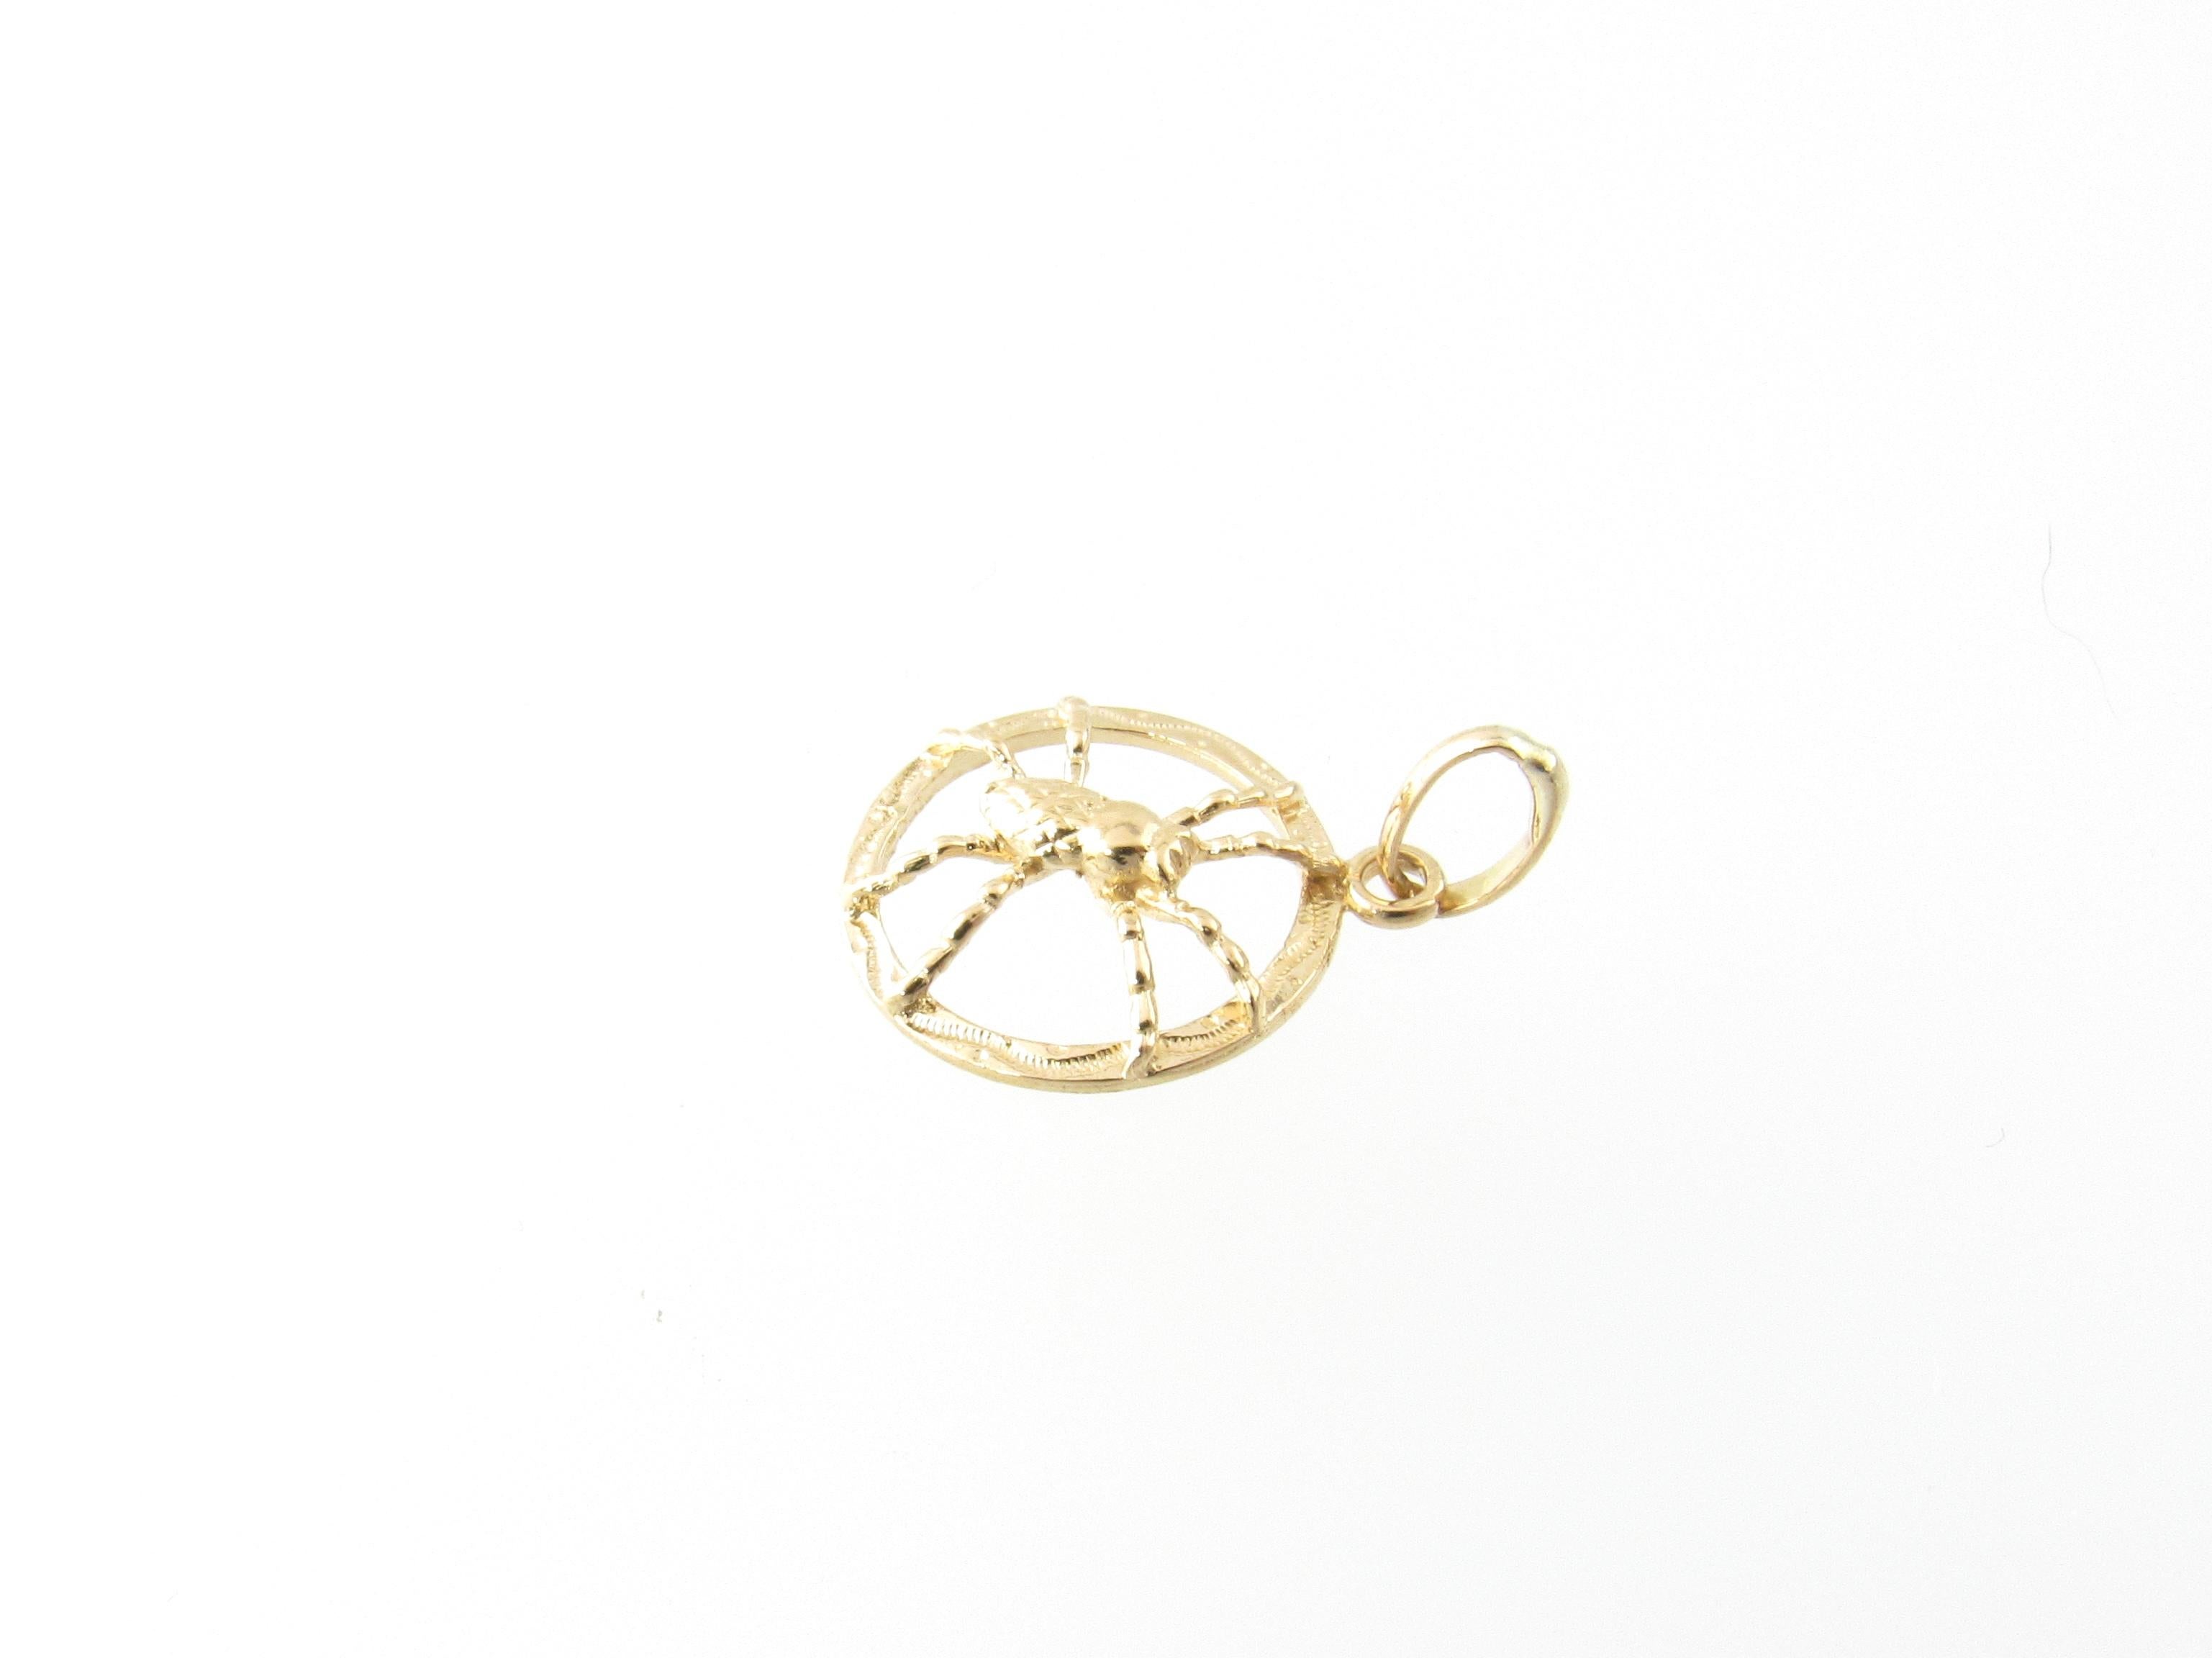 Vintage 18 Karat Yellow Gold Spider Charm

The spider represents mystery, growth and power.

This lovely charm features a 3D spider beautifully detailed in 18K yellow gold.

Size: 20 mm x 17 mm (actual charm)

Weight: 1.2 dwt. / 1.9 gr.

Stamped: